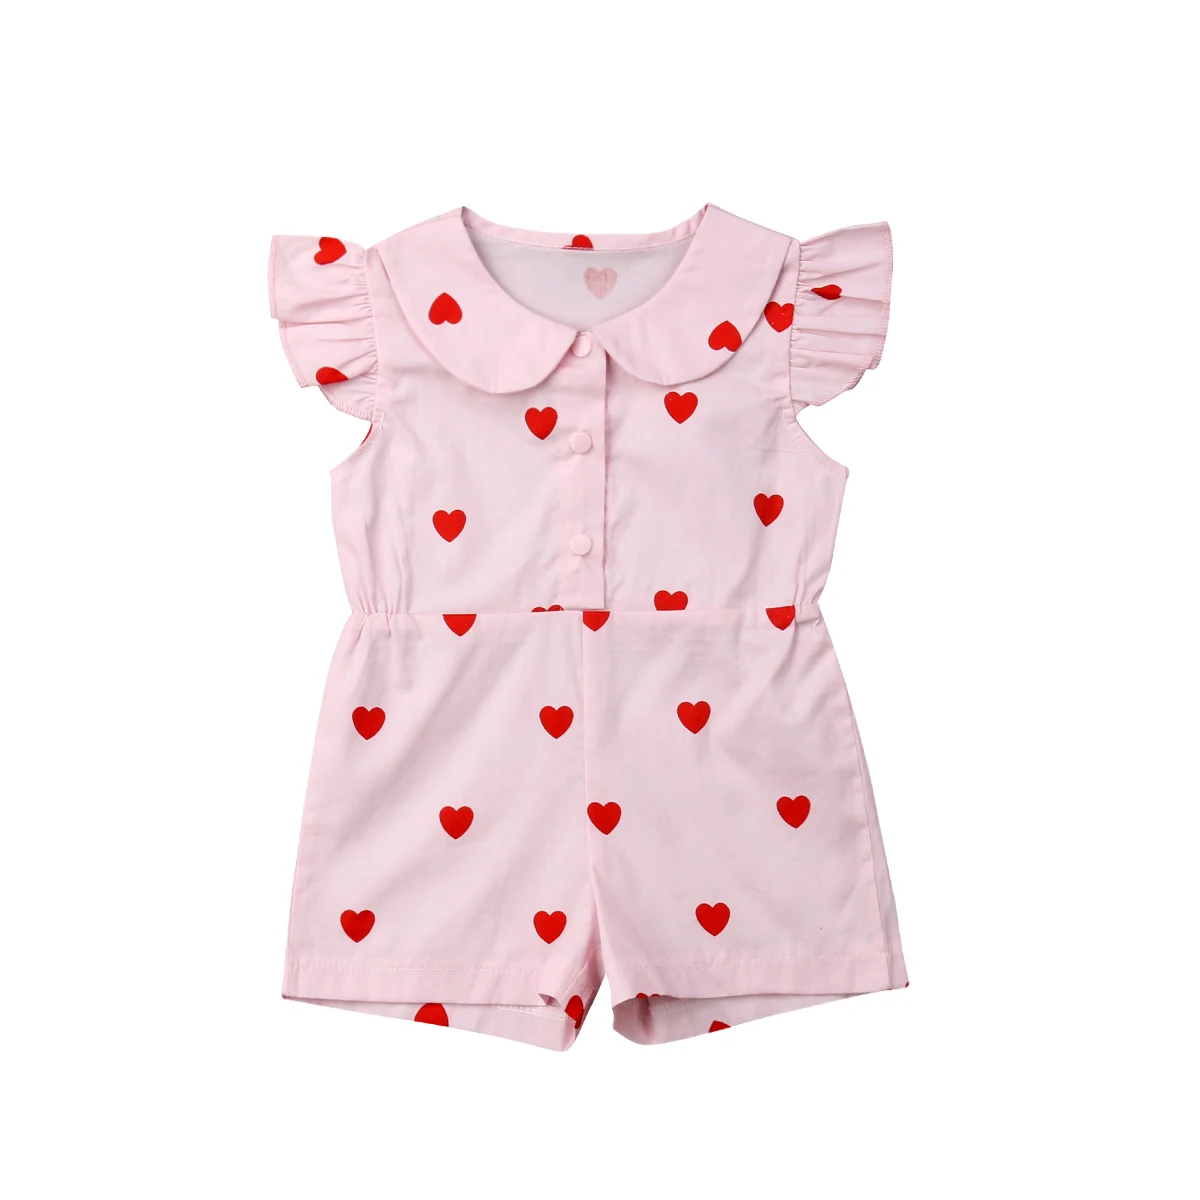 

Lovely Toddler Kids Baby Girl Fly Sleeve Peter Pan Collar Heart Print Romper Jumpsuit Playsuit Sunsuit Clothes 1-5Y